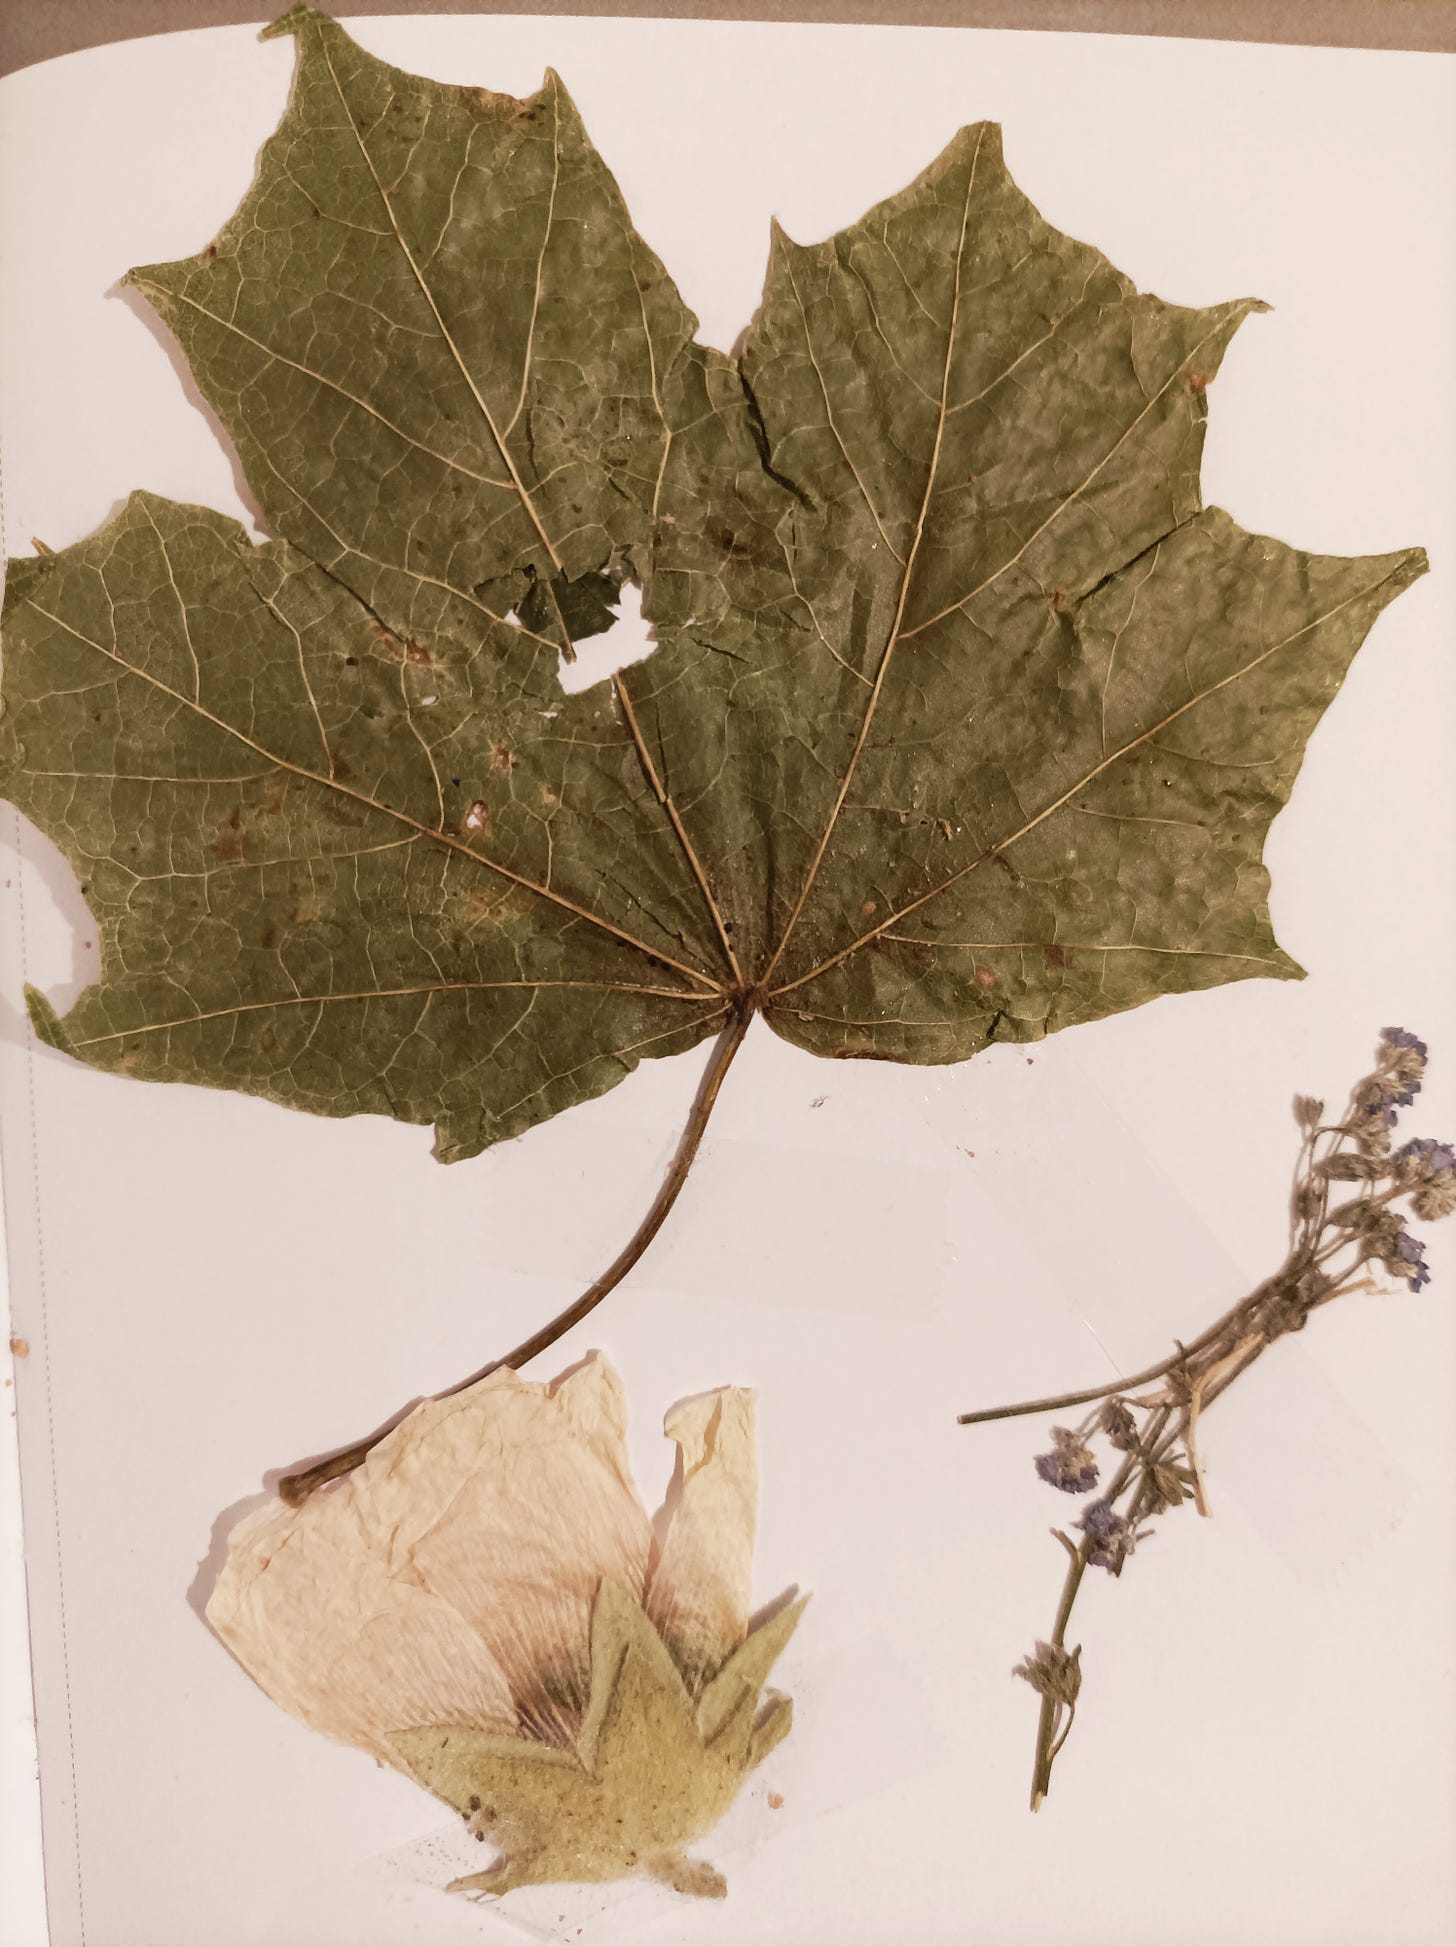 A picture of dry leaf and two dried flowers